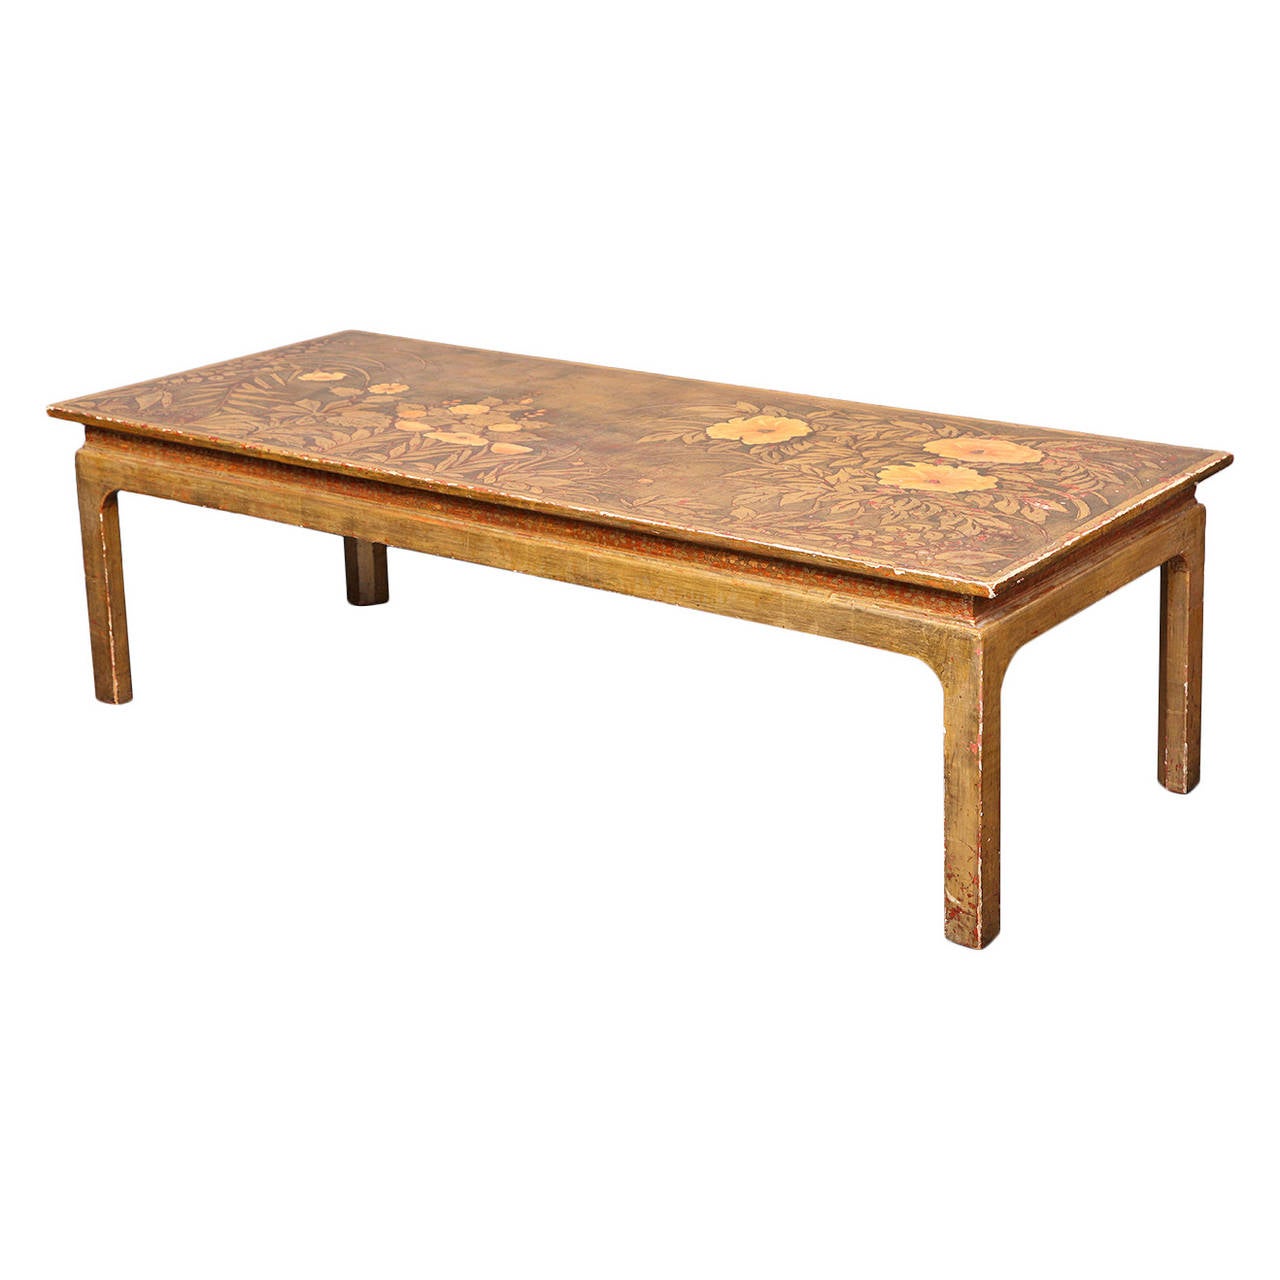 Max Kuehne (1880-1968).
Hand-painted low table with gold-leafed incised and gessoed floral decoration.
Signed: Max Kuehne.
American, circa 1935.